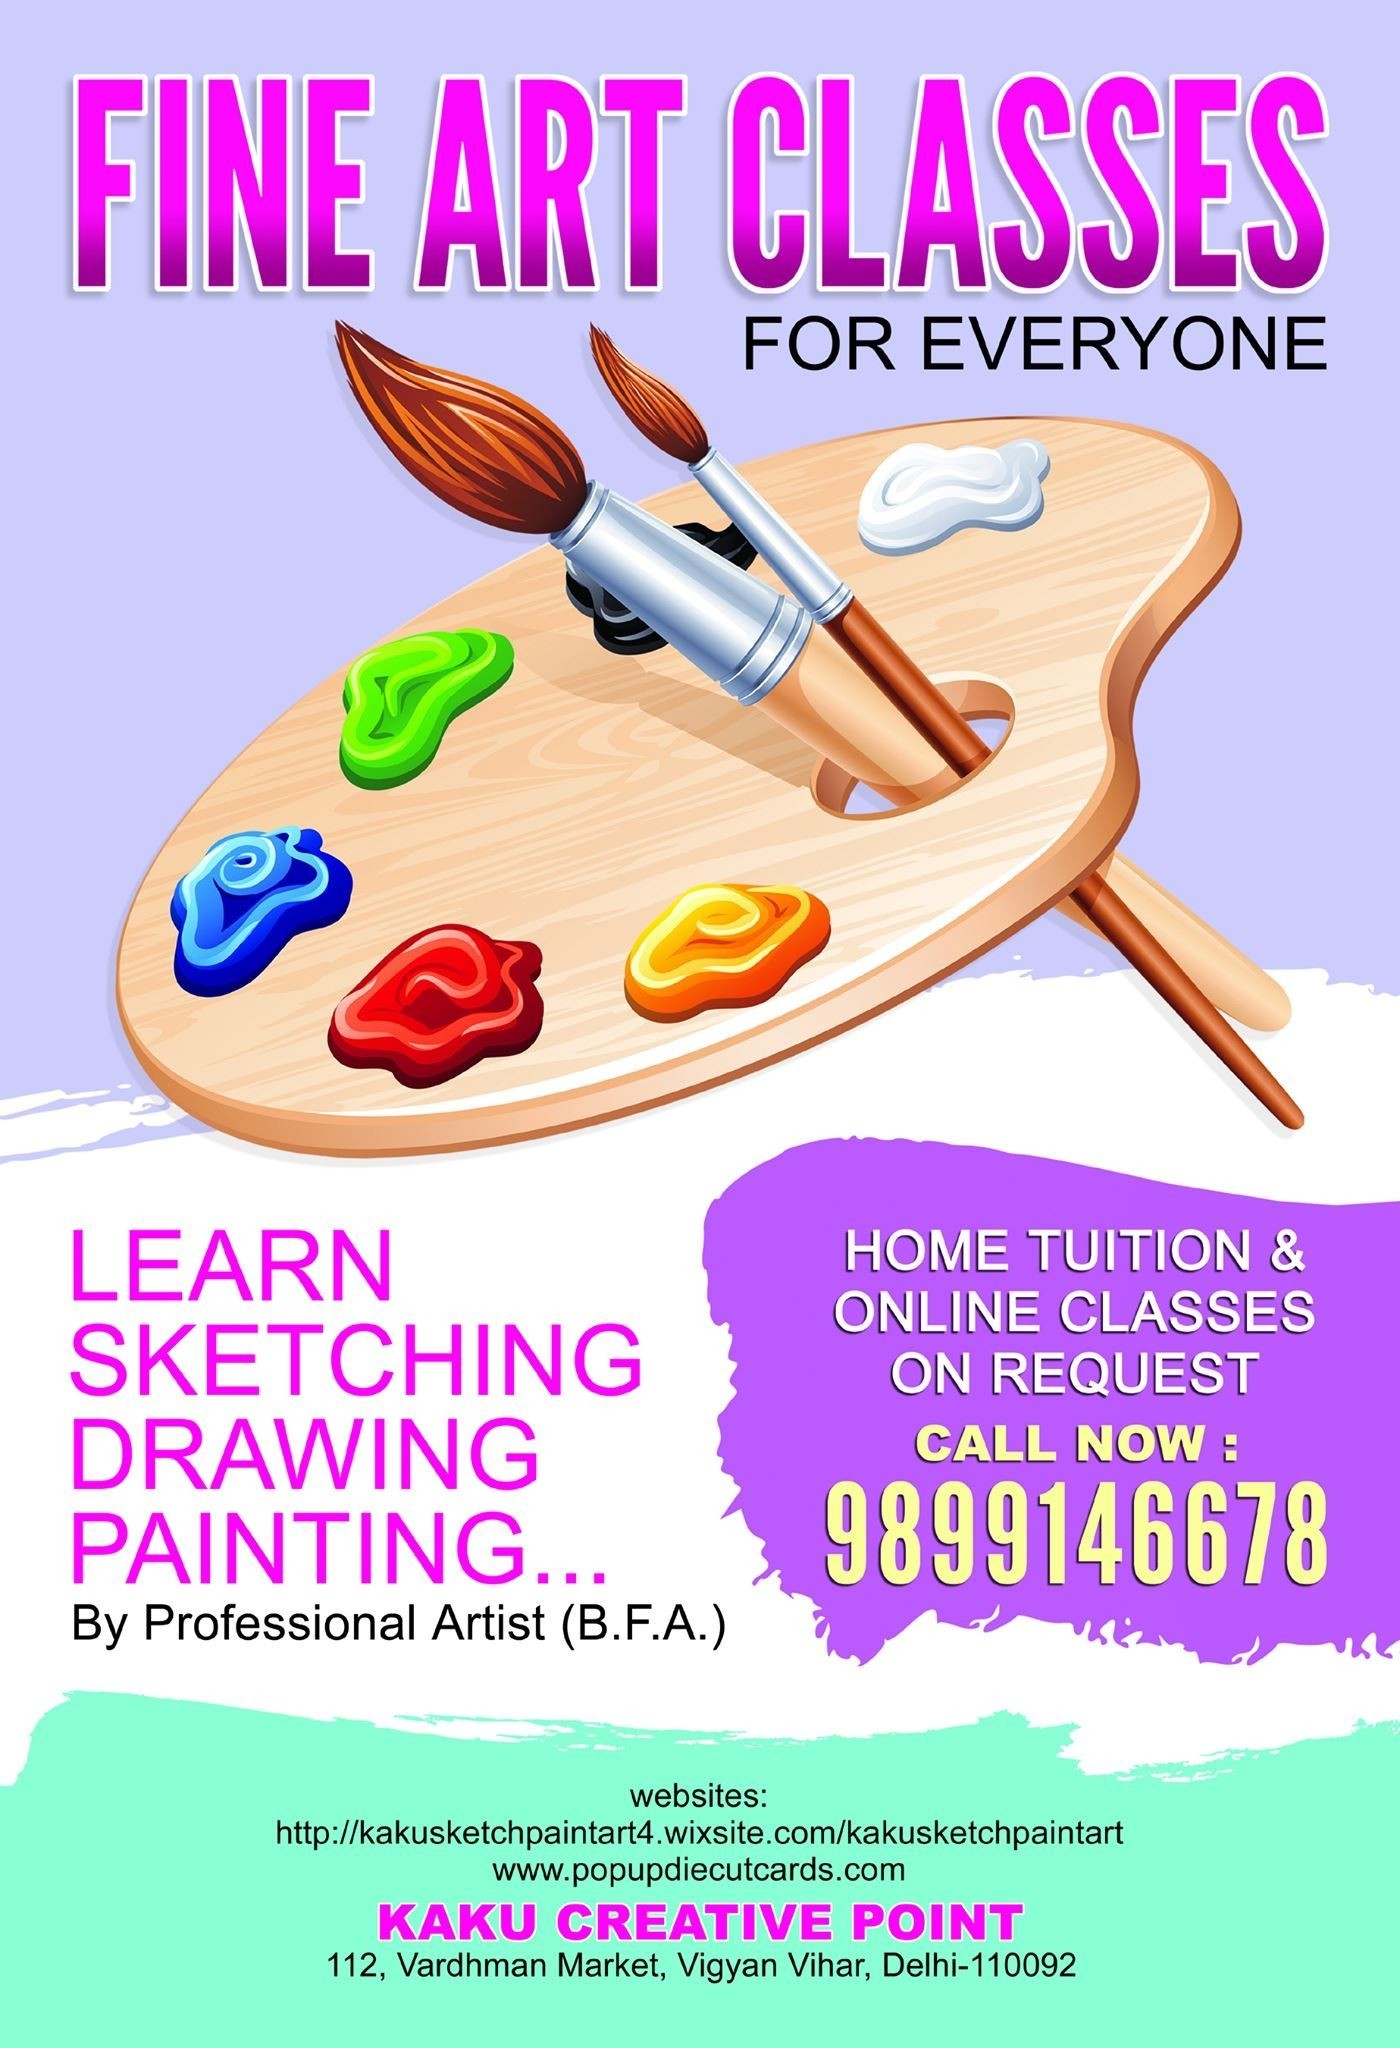 HOME TUTOR FOR SKETCHING DRAWING PAINTING  LEARN FINE ART BASICS 9